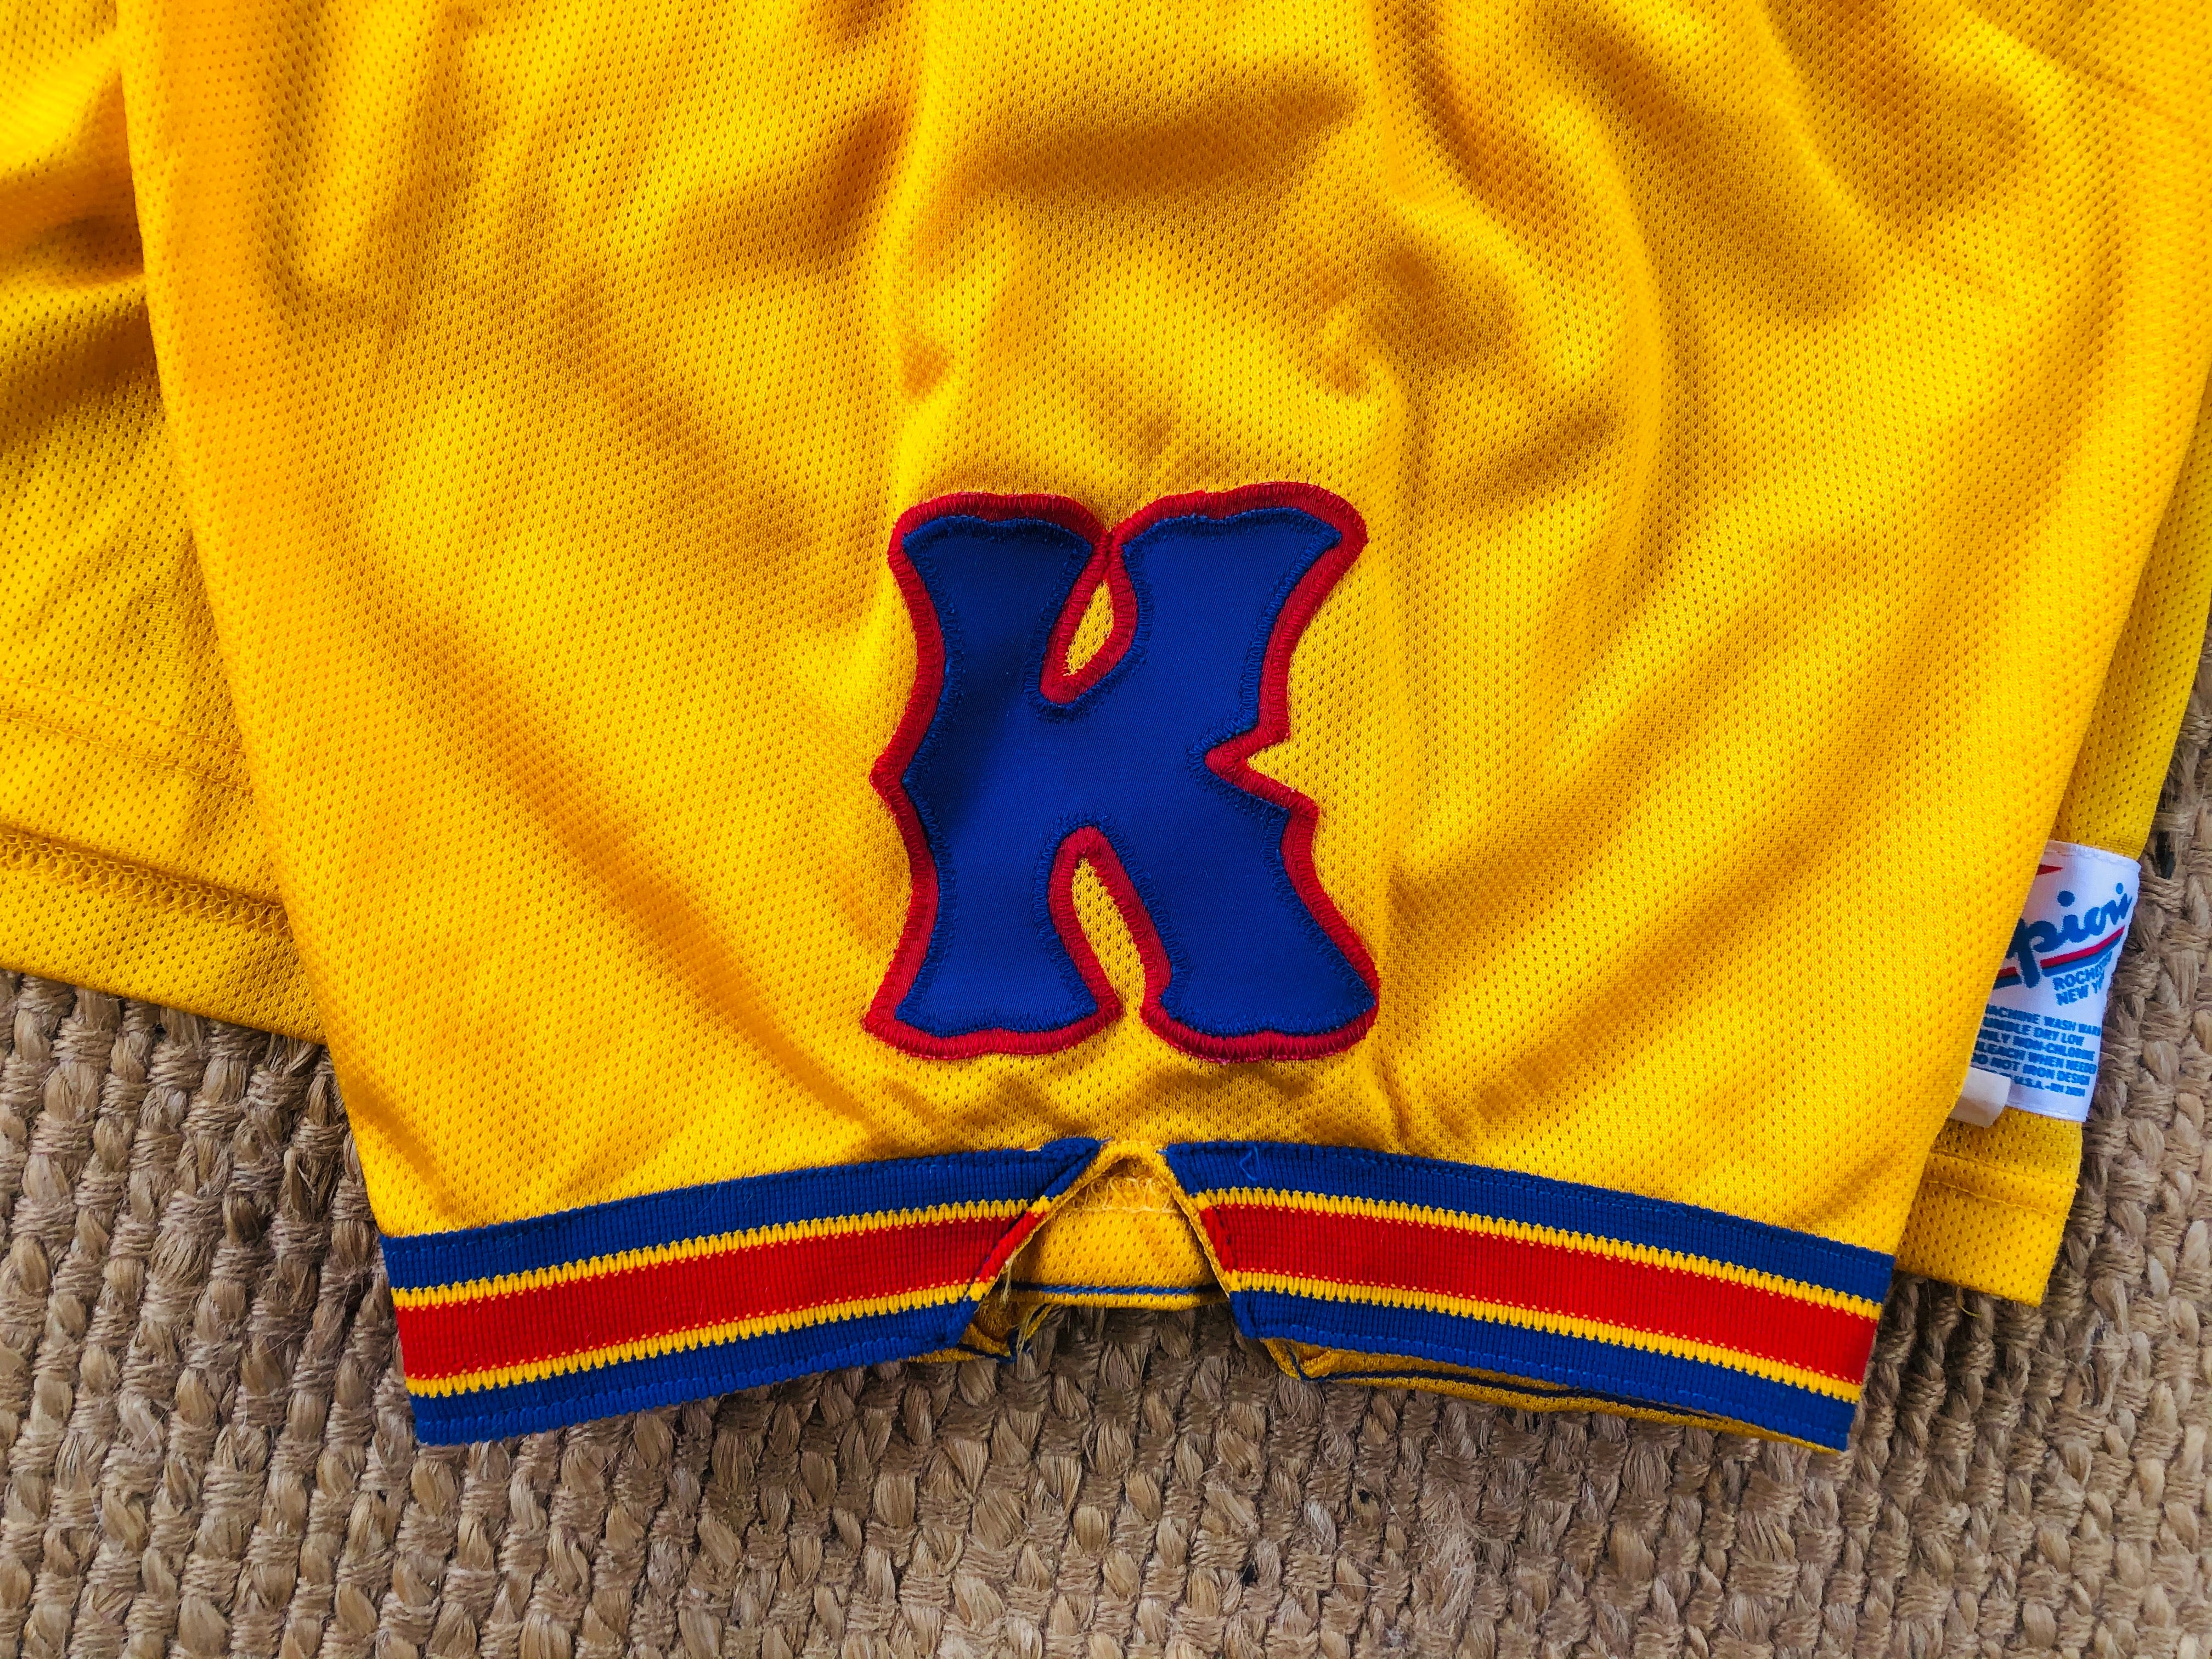 A reader copped one of the infamous yellow jerseys and you gotta